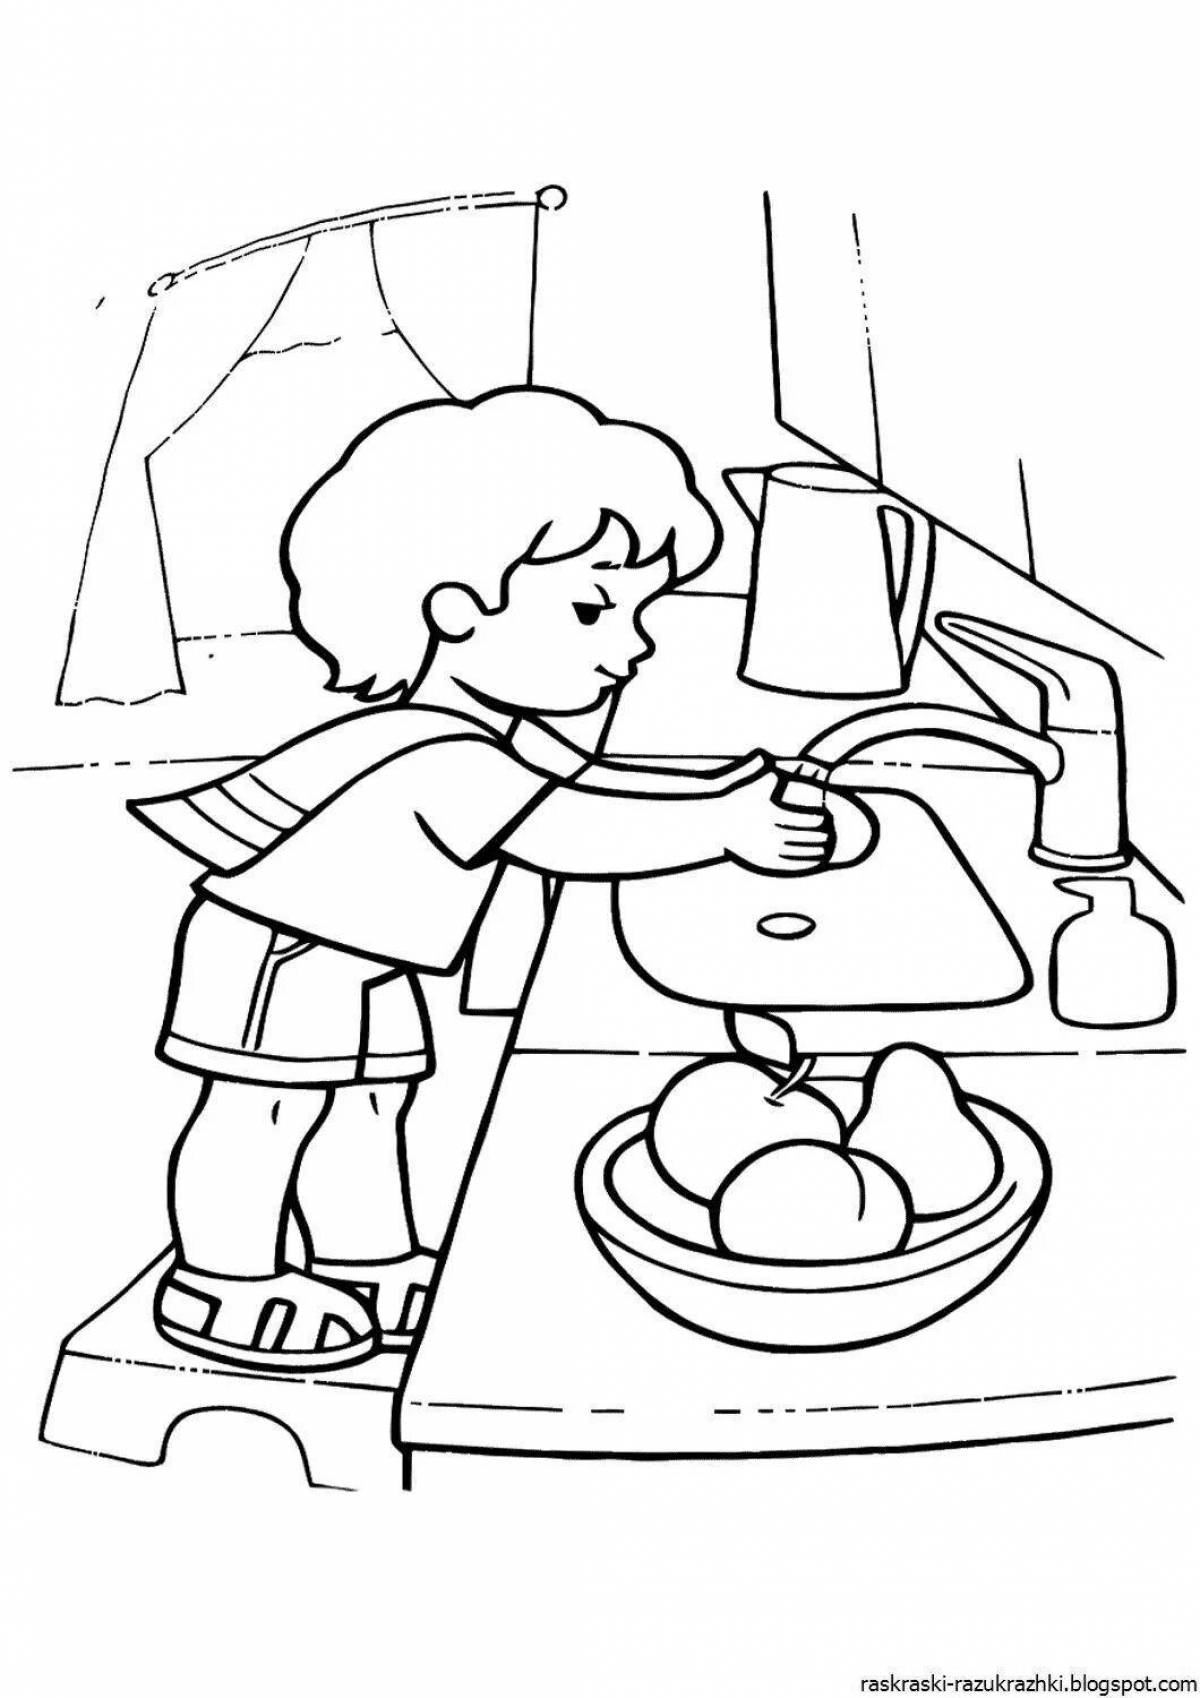 Health stimulating coloring book for 3-4 year olds